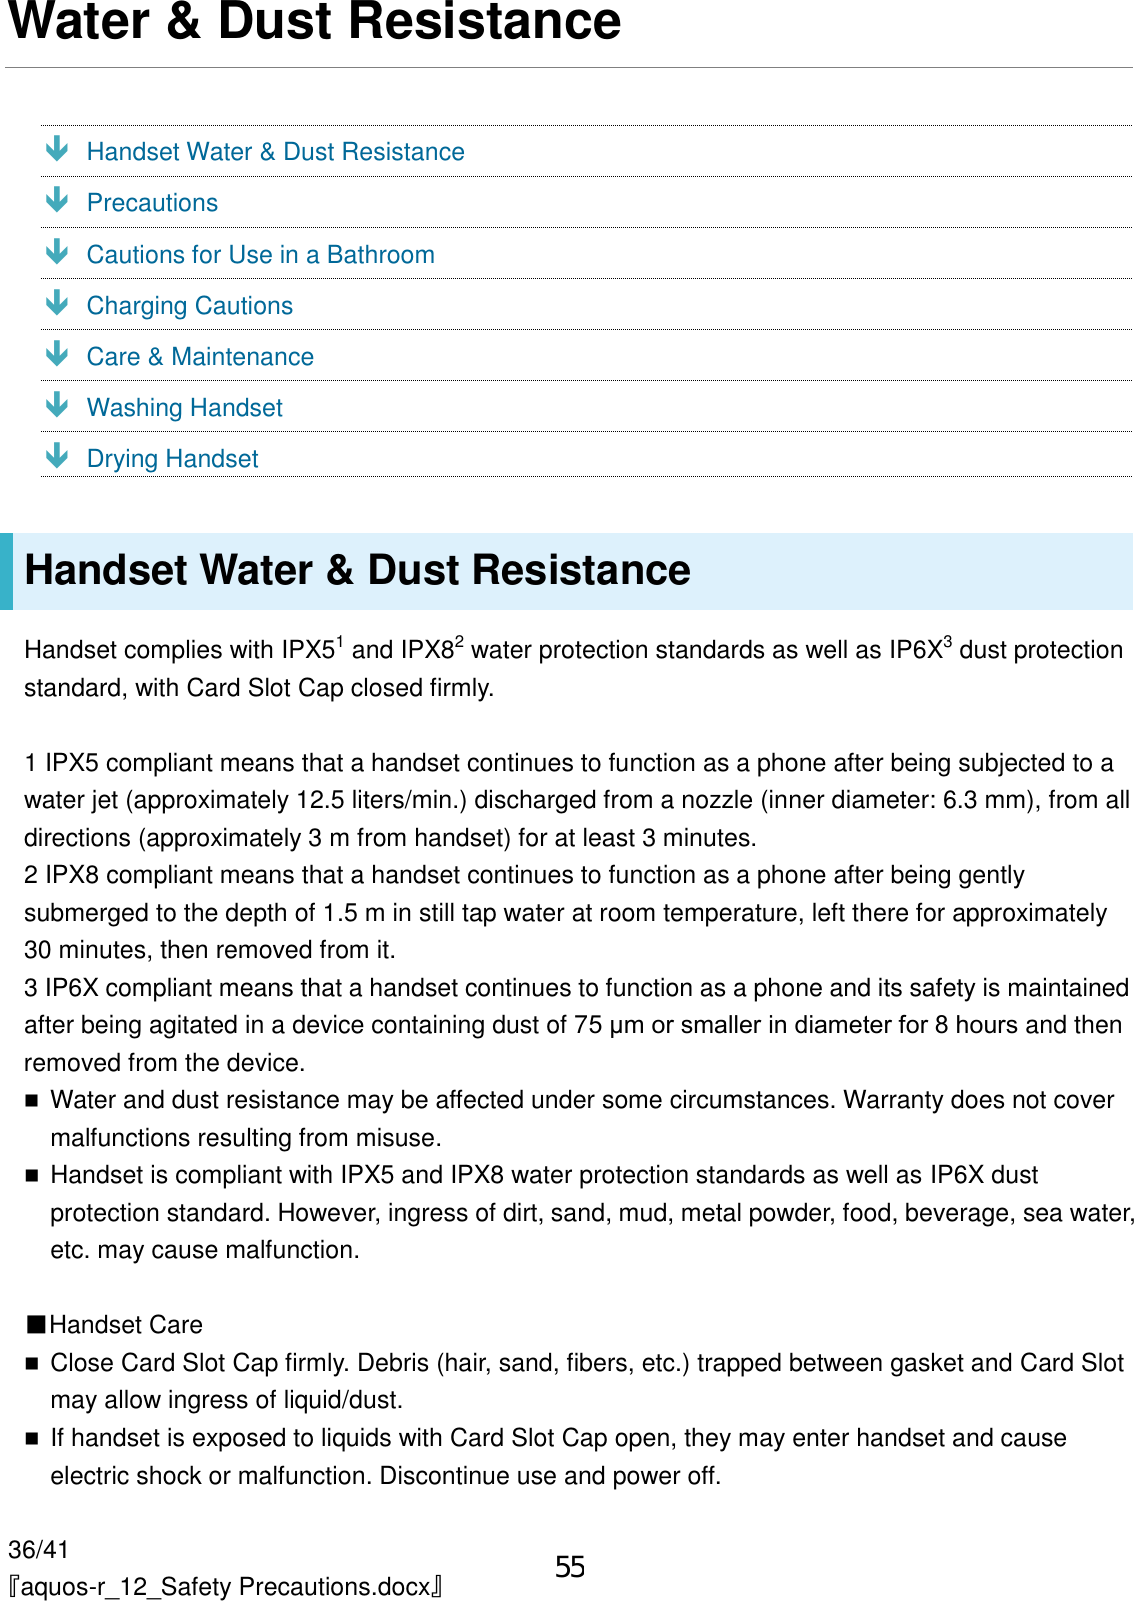 36/41 『aquos-r_12_Safety Precautions.docx』 Water &amp; Dust Resistance  Handset Water &amp; Dust Resistance  Precautions  Cautions for Use in a Bathroom  Charging Cautions  Care &amp; Maintenance  Washing Handset  Drying Handset Handset Water &amp; Dust Resistance Handset complies with IPX51 and IPX82 water protection standards as well as IP6X3 dust protection standard, with Card Slot Cap closed firmly. 1 IPX5 compliant means that a handset continues to function as a phone after being subjected to a water jet (approximately 12.5 liters/min.) discharged from a nozzle (inner diameter: 6.3 mm), from all directions (approximately 3 m from handset) for at least 3 minutes. 2 IPX8 compliant means that a handset continues to function as a phone after being gently submerged to the depth of 1.5 m in still tap water at room temperature, left there for approximately 30 minutes, then removed from it. 3 IP6X compliant means that a handset continues to function as a phone and its safety is maintained after being agitated in a device containing dust of 75 μm or smaller in diameter for 8 hours and then removed from the device. Water and dust resistance may be affected under some circumstances. Warranty does not covermalfunctions resulting from misuse.Handset is compliant with IPX5 and IPX8 water protection standards as well as IP6X dustprotection standard. However, ingress of dirt, sand, mud, metal powder, food, beverage, sea water,etc. may cause malfunction.■Handset CareClose Card Slot Cap firmly. Debris (hair, sand, fibers, etc.) trapped between gasket and Card Slotmay allow ingress of liquid/dust.If handset is exposed to liquids with Card Slot Cap open, they may enter handset and causeelectric shock or malfunction. Discontinue use and power off.55